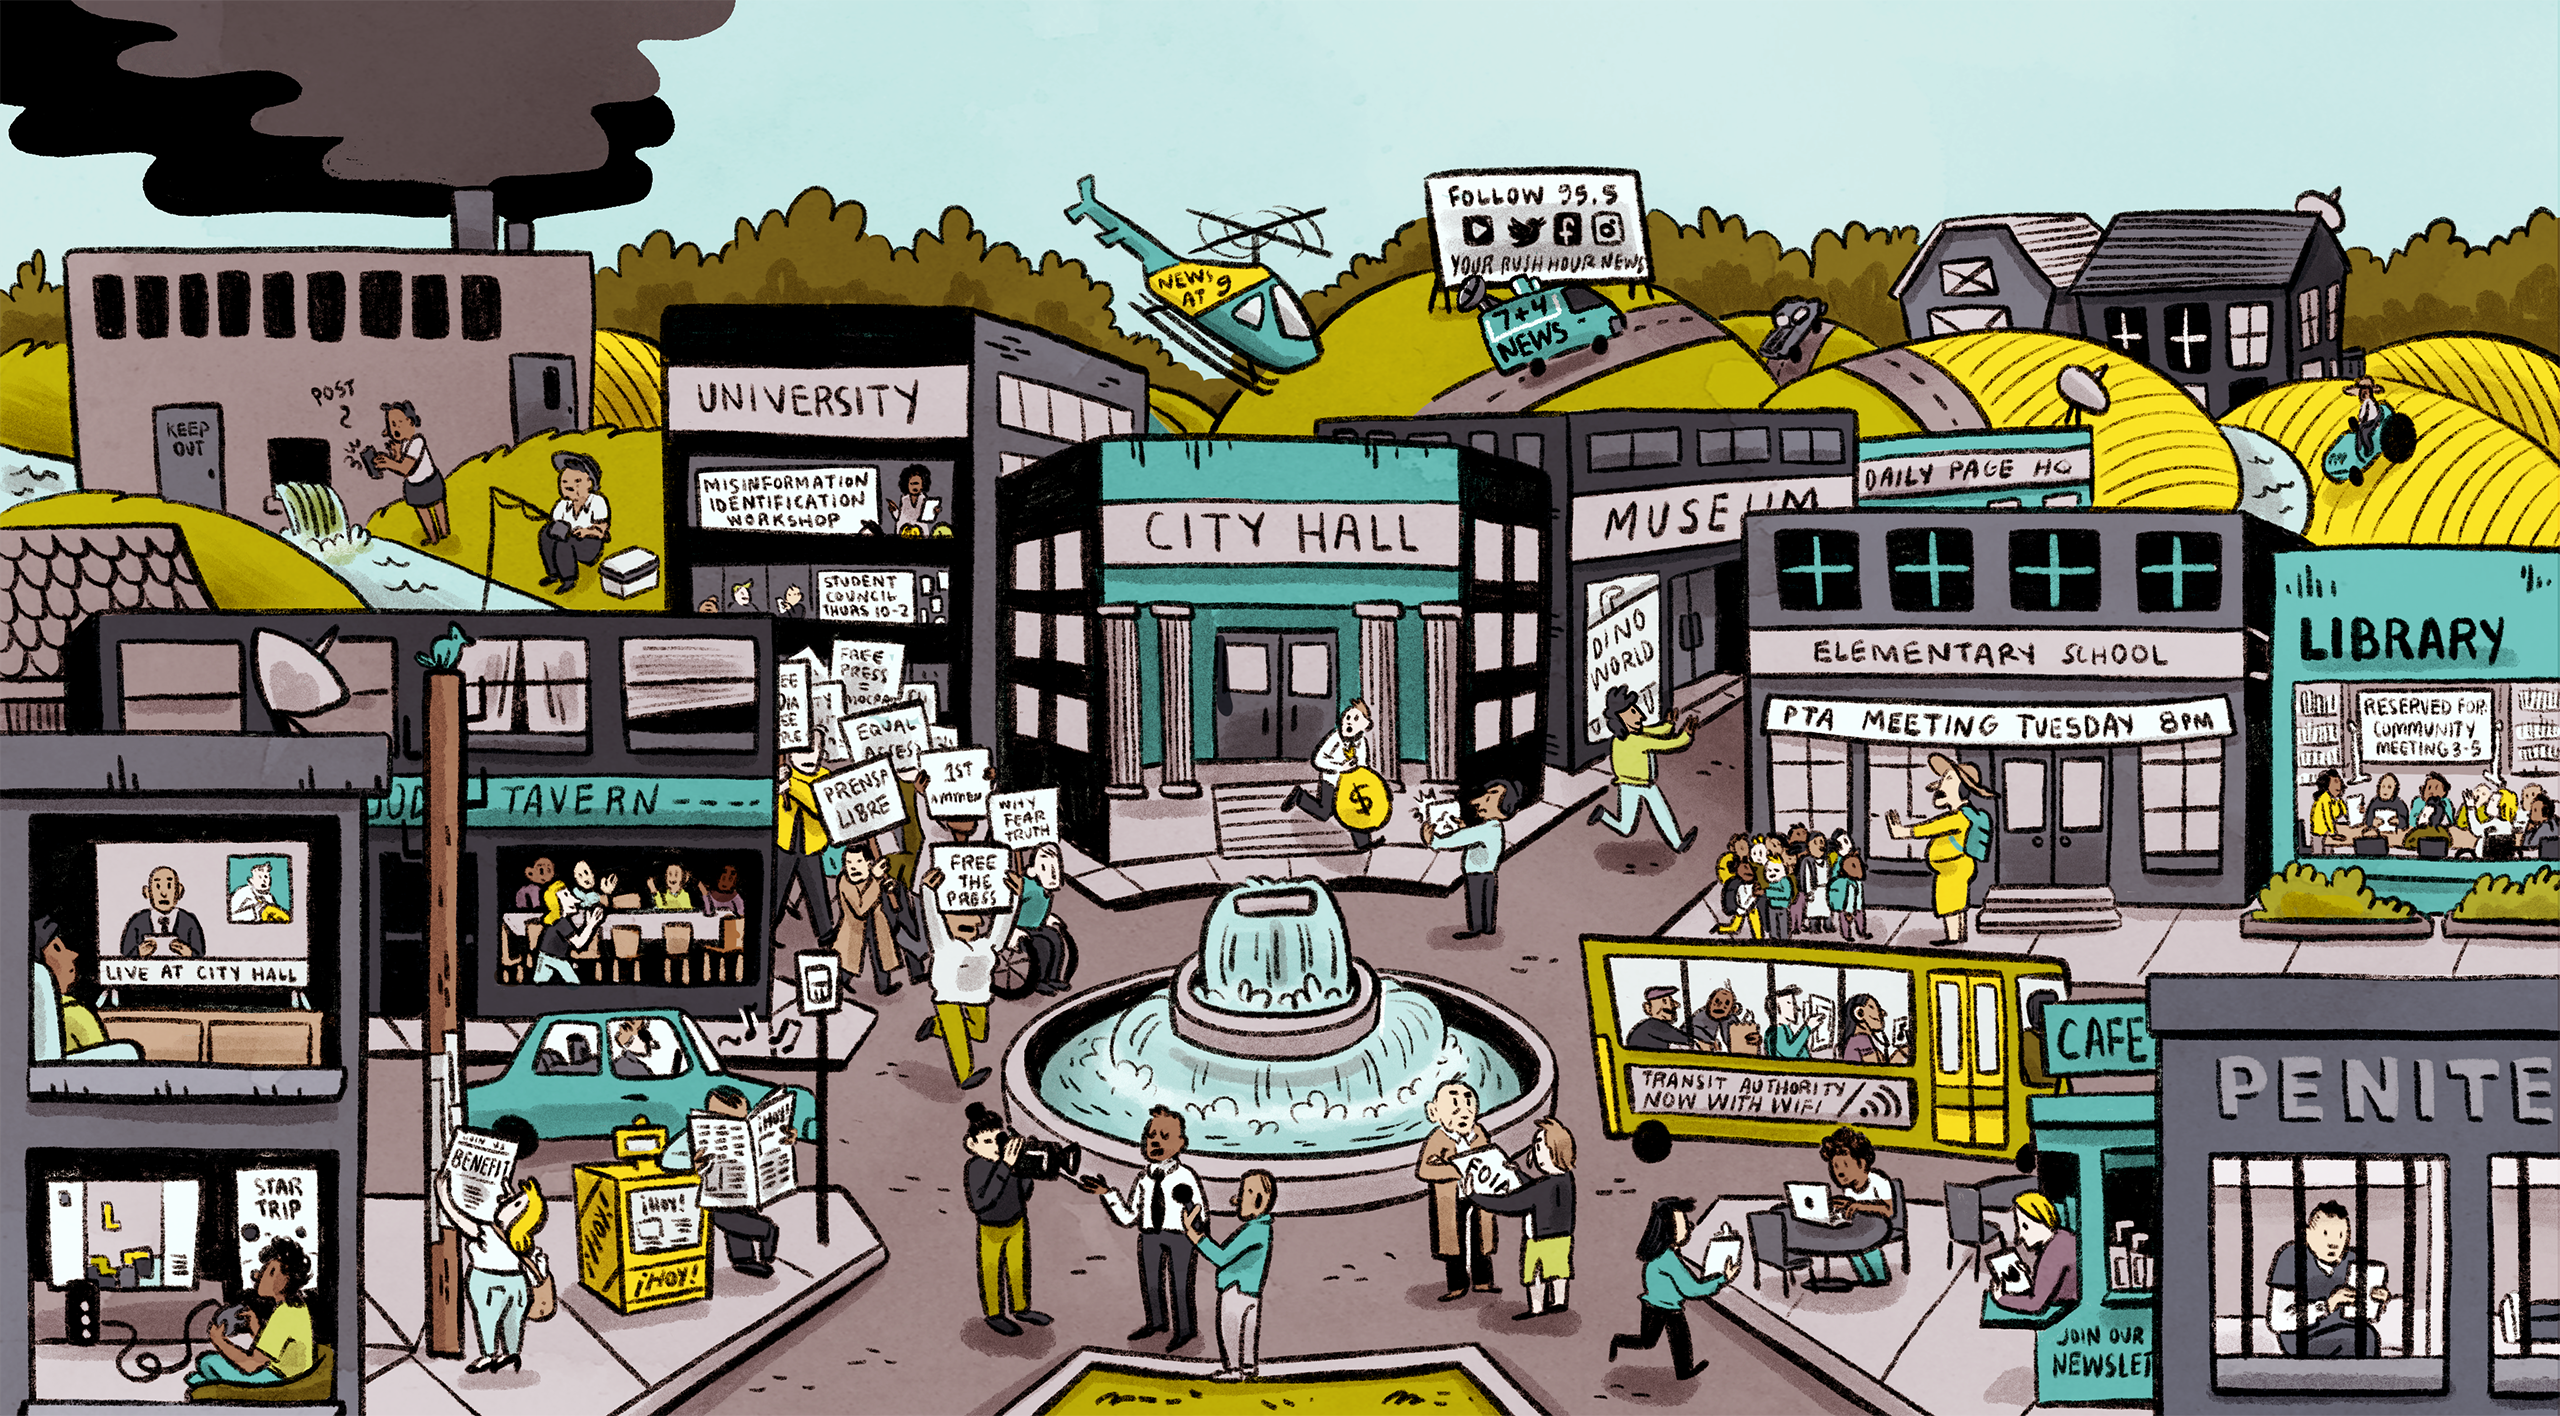 Illustration of a town square with City Hall and a fountain in the center, and other common public areas including schools, a library, a museum, and public transit. The image shows the many different ways people receive news and information, including newspapers, websites, TV, word of mouth, and community meetings. It also illustrates ways journalism helps communities build power, from PTA meetings, to protests, to investigating corruption in local government.